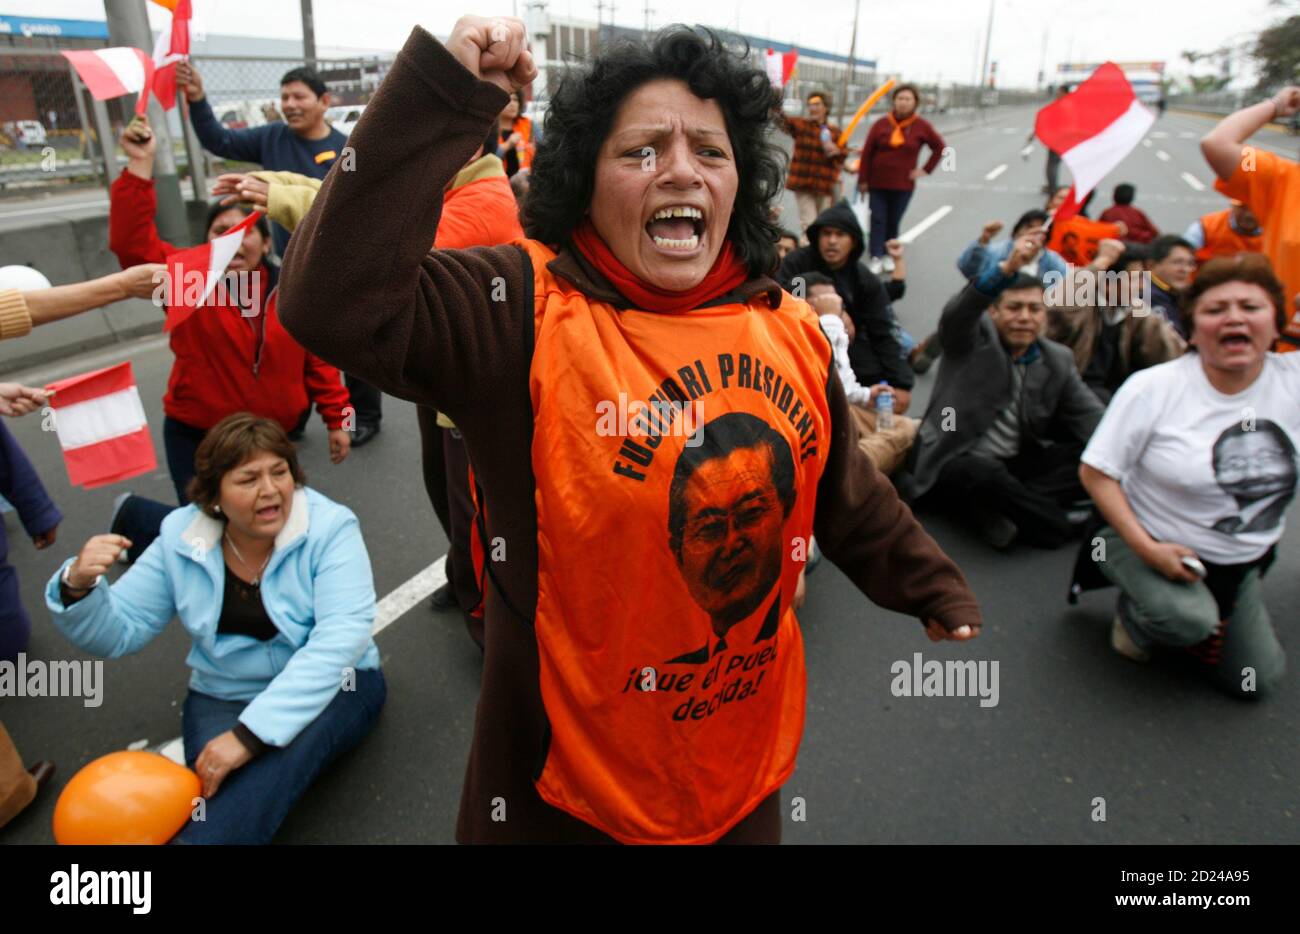 Supporters of Peru's former President Alberto Fujimori protest outside the airport before his arrival in Lima September 22, 2007. Fujimori was flown out of Chile on Saturday to face charges of human rights abuse and corruption seven years after fleeing Peru for Japan. REUTERS/Mariana Bazo (PERU) Stock Photo